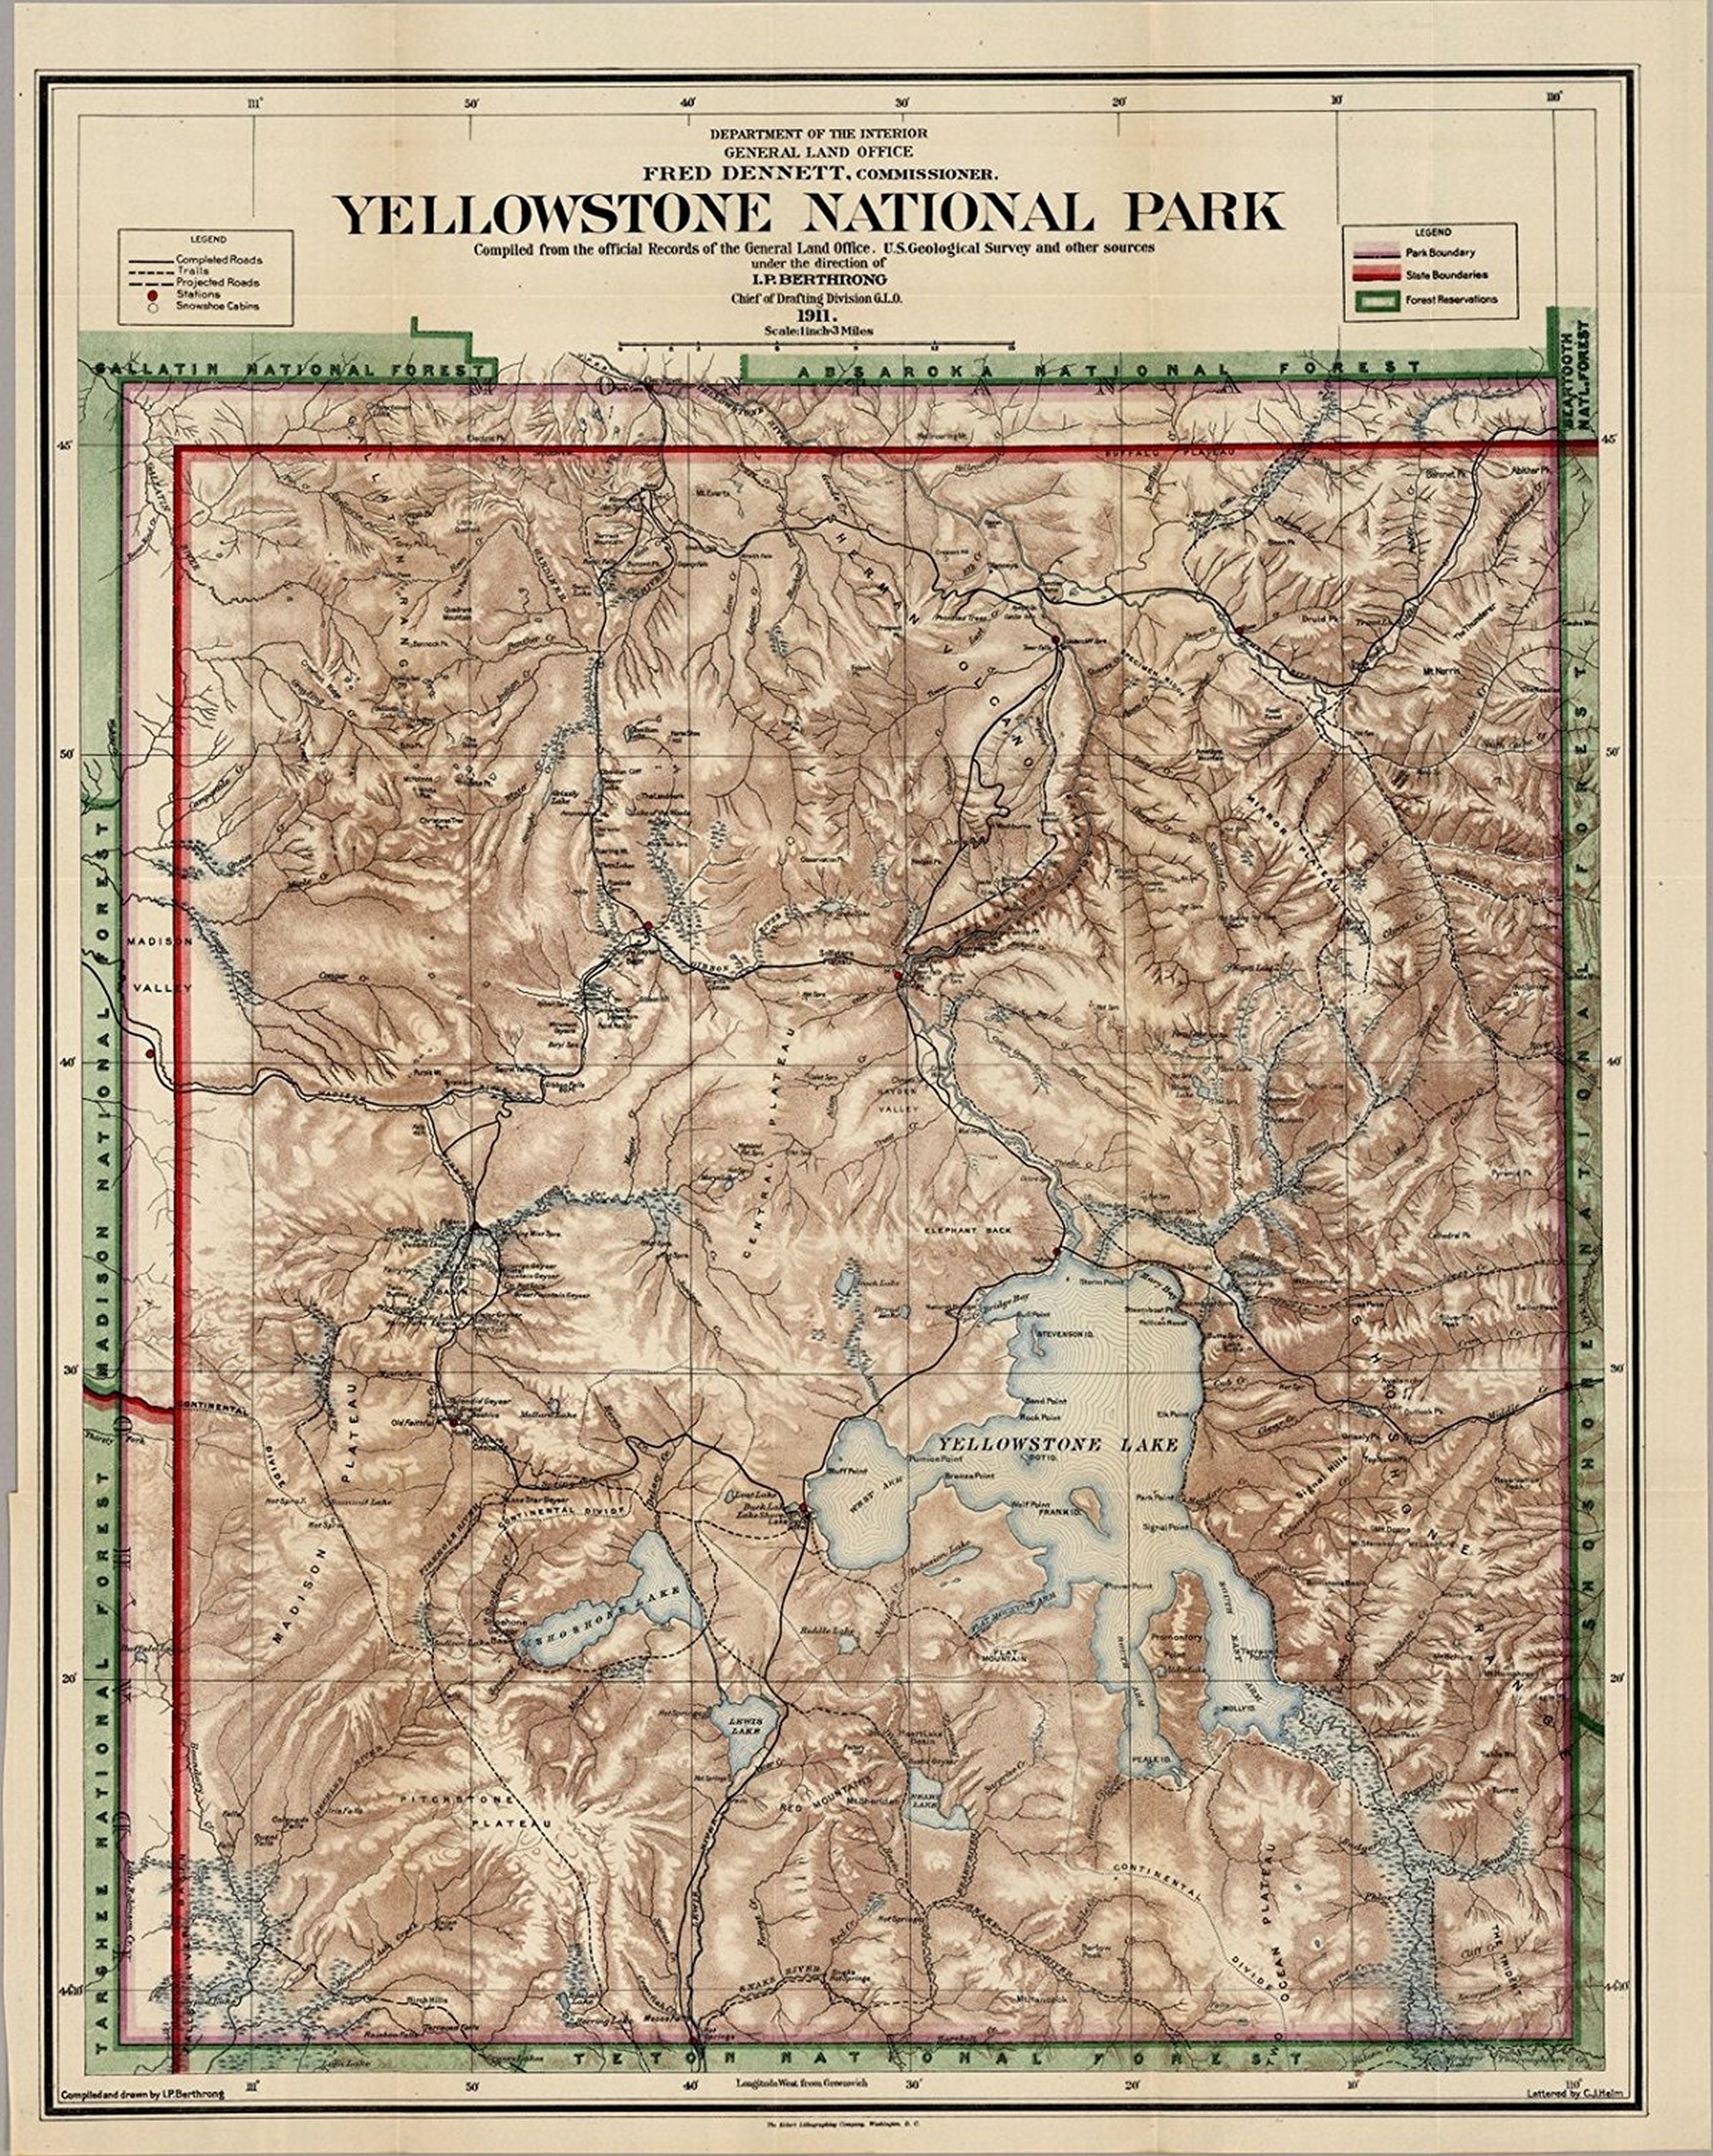 Yellowstone National Park. Department Of The Interior General Land Office, Fred Dennett, Commissioner. Compiled from the official Records of the General Land Office, U.S. Geological Survey and other sources under the direction of I.P. Berthrong, Chief of